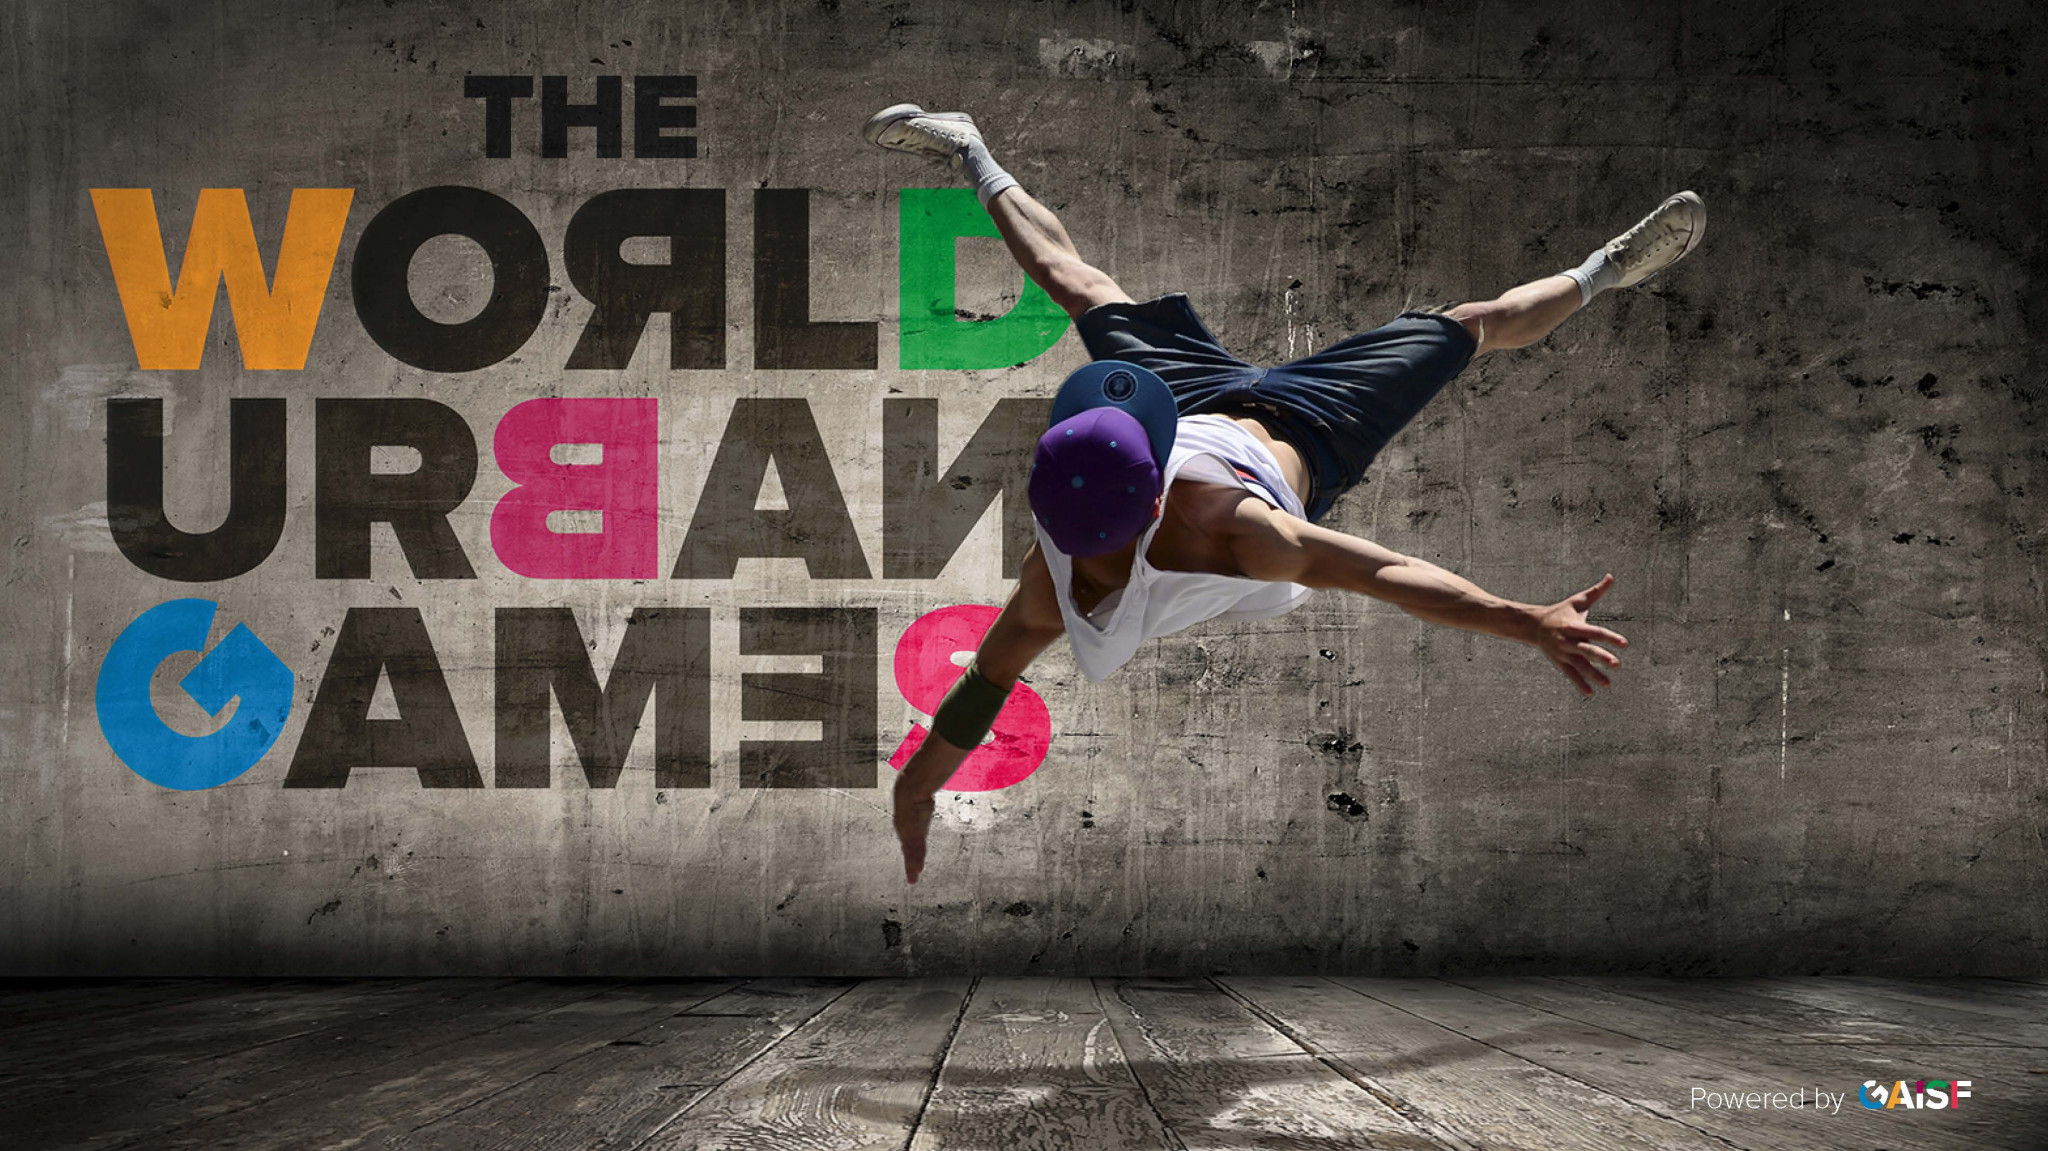 Budapest will host the first edition of the World Urban Games in September ©GAISF